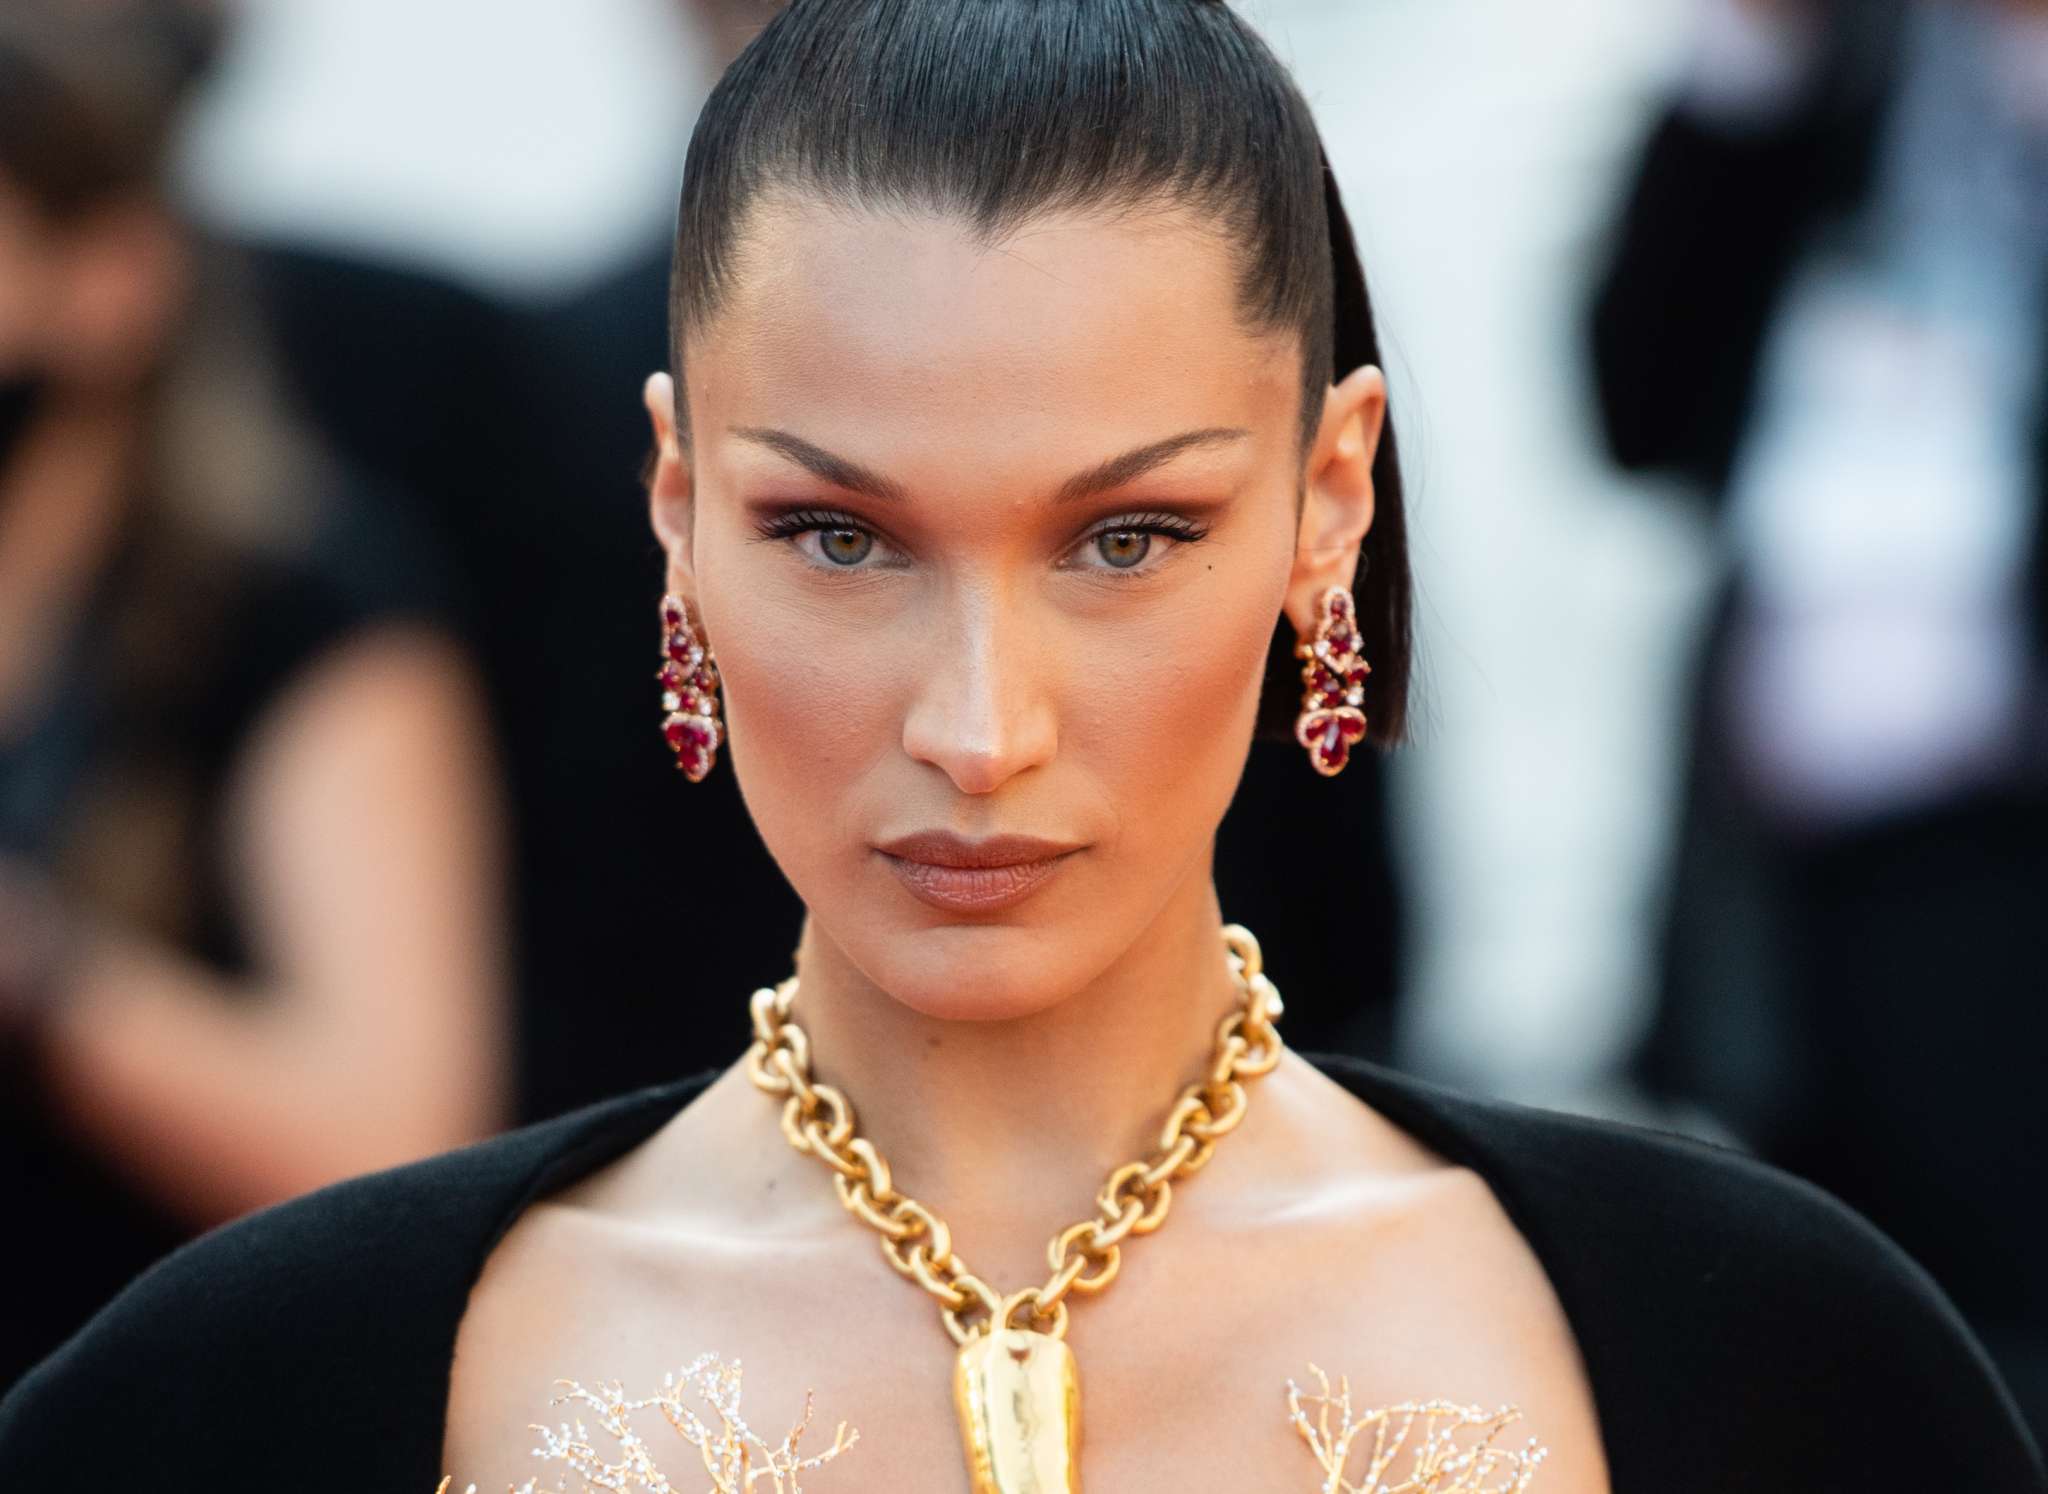 Bella Hadid Is Rocking The Fashion Game With A '90s Themed Denim And Leopard Print Skirt